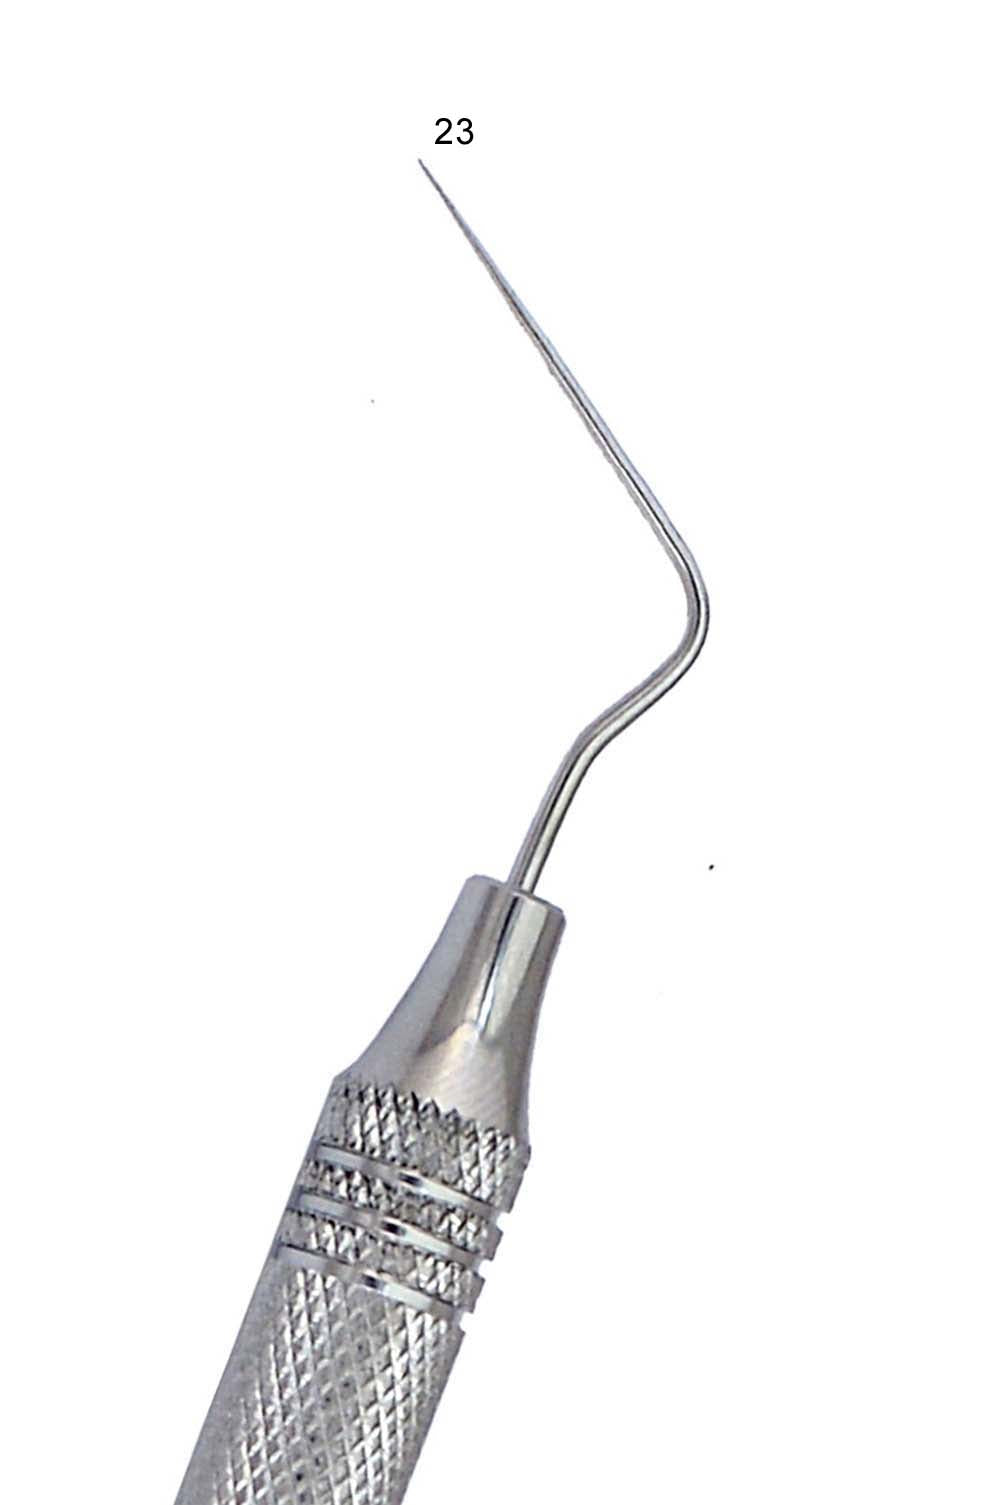 Root Canal Spreader D11T Thinner